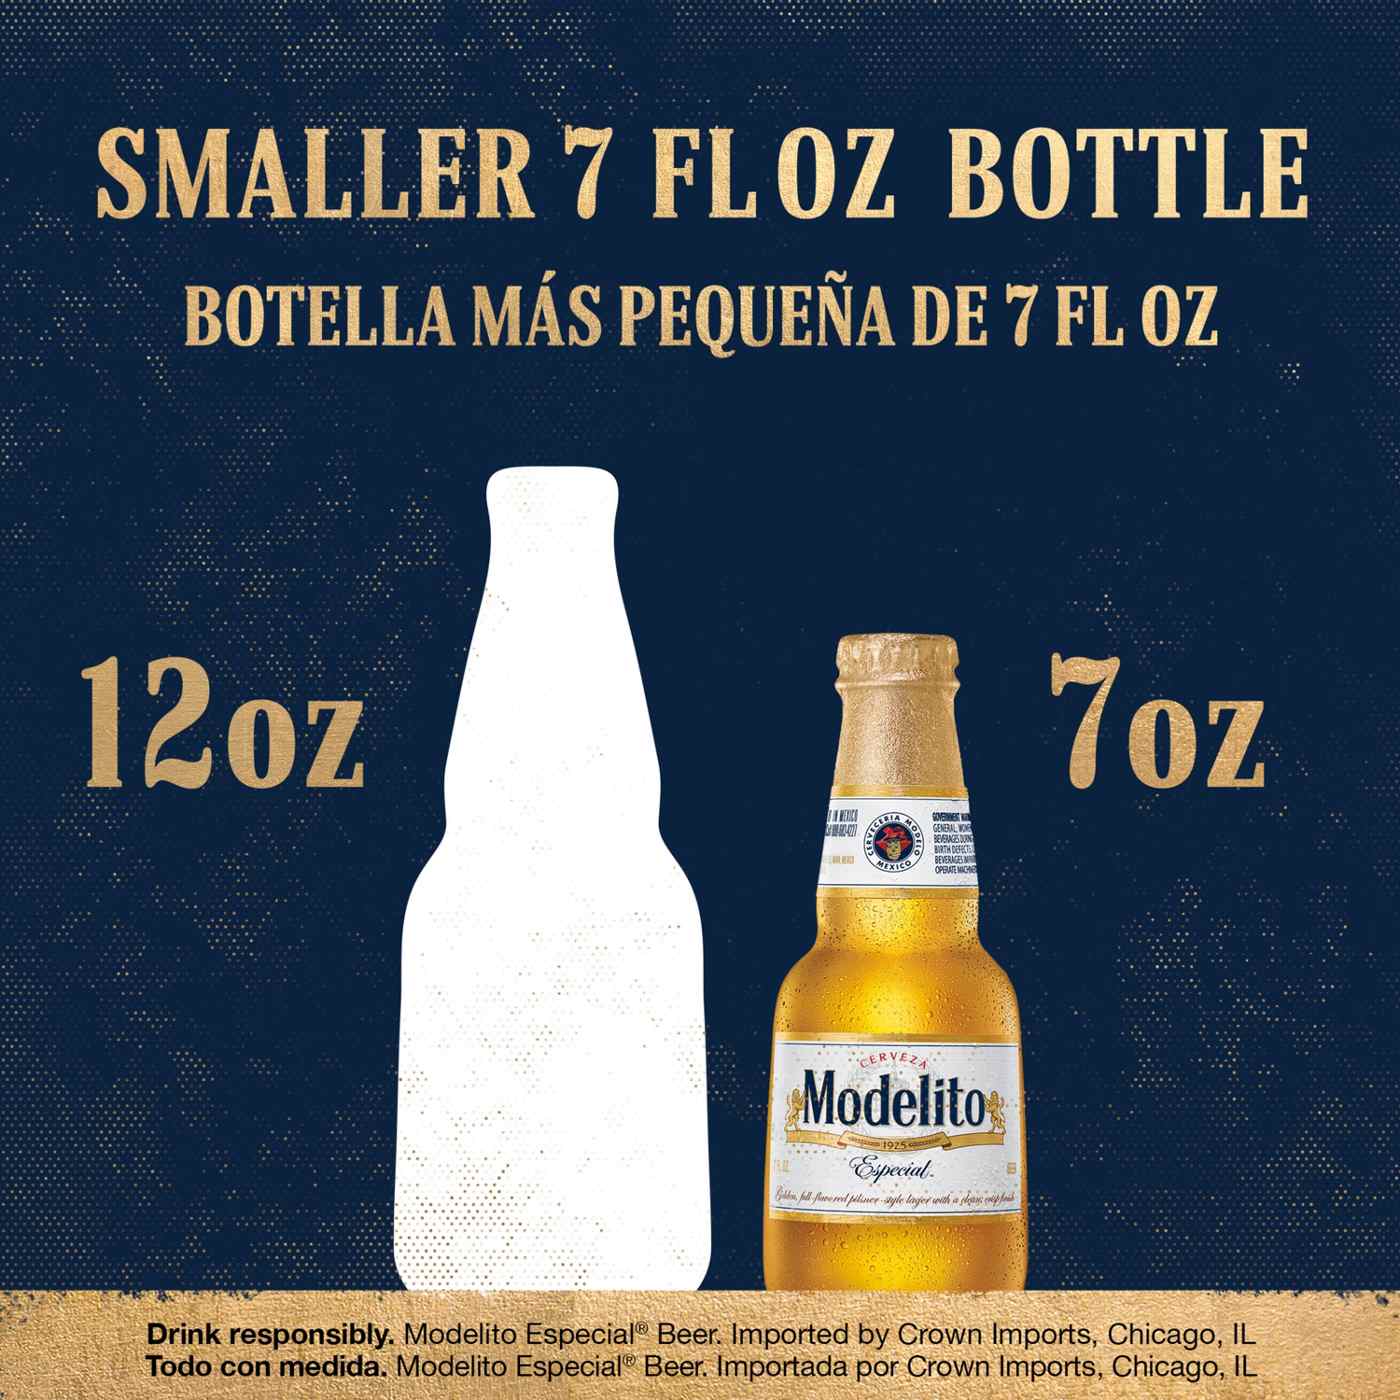 Modelo Especial Modelito Mexican Lager Import Beer 7 oz Bottles, 24 pk; image 10 of 11